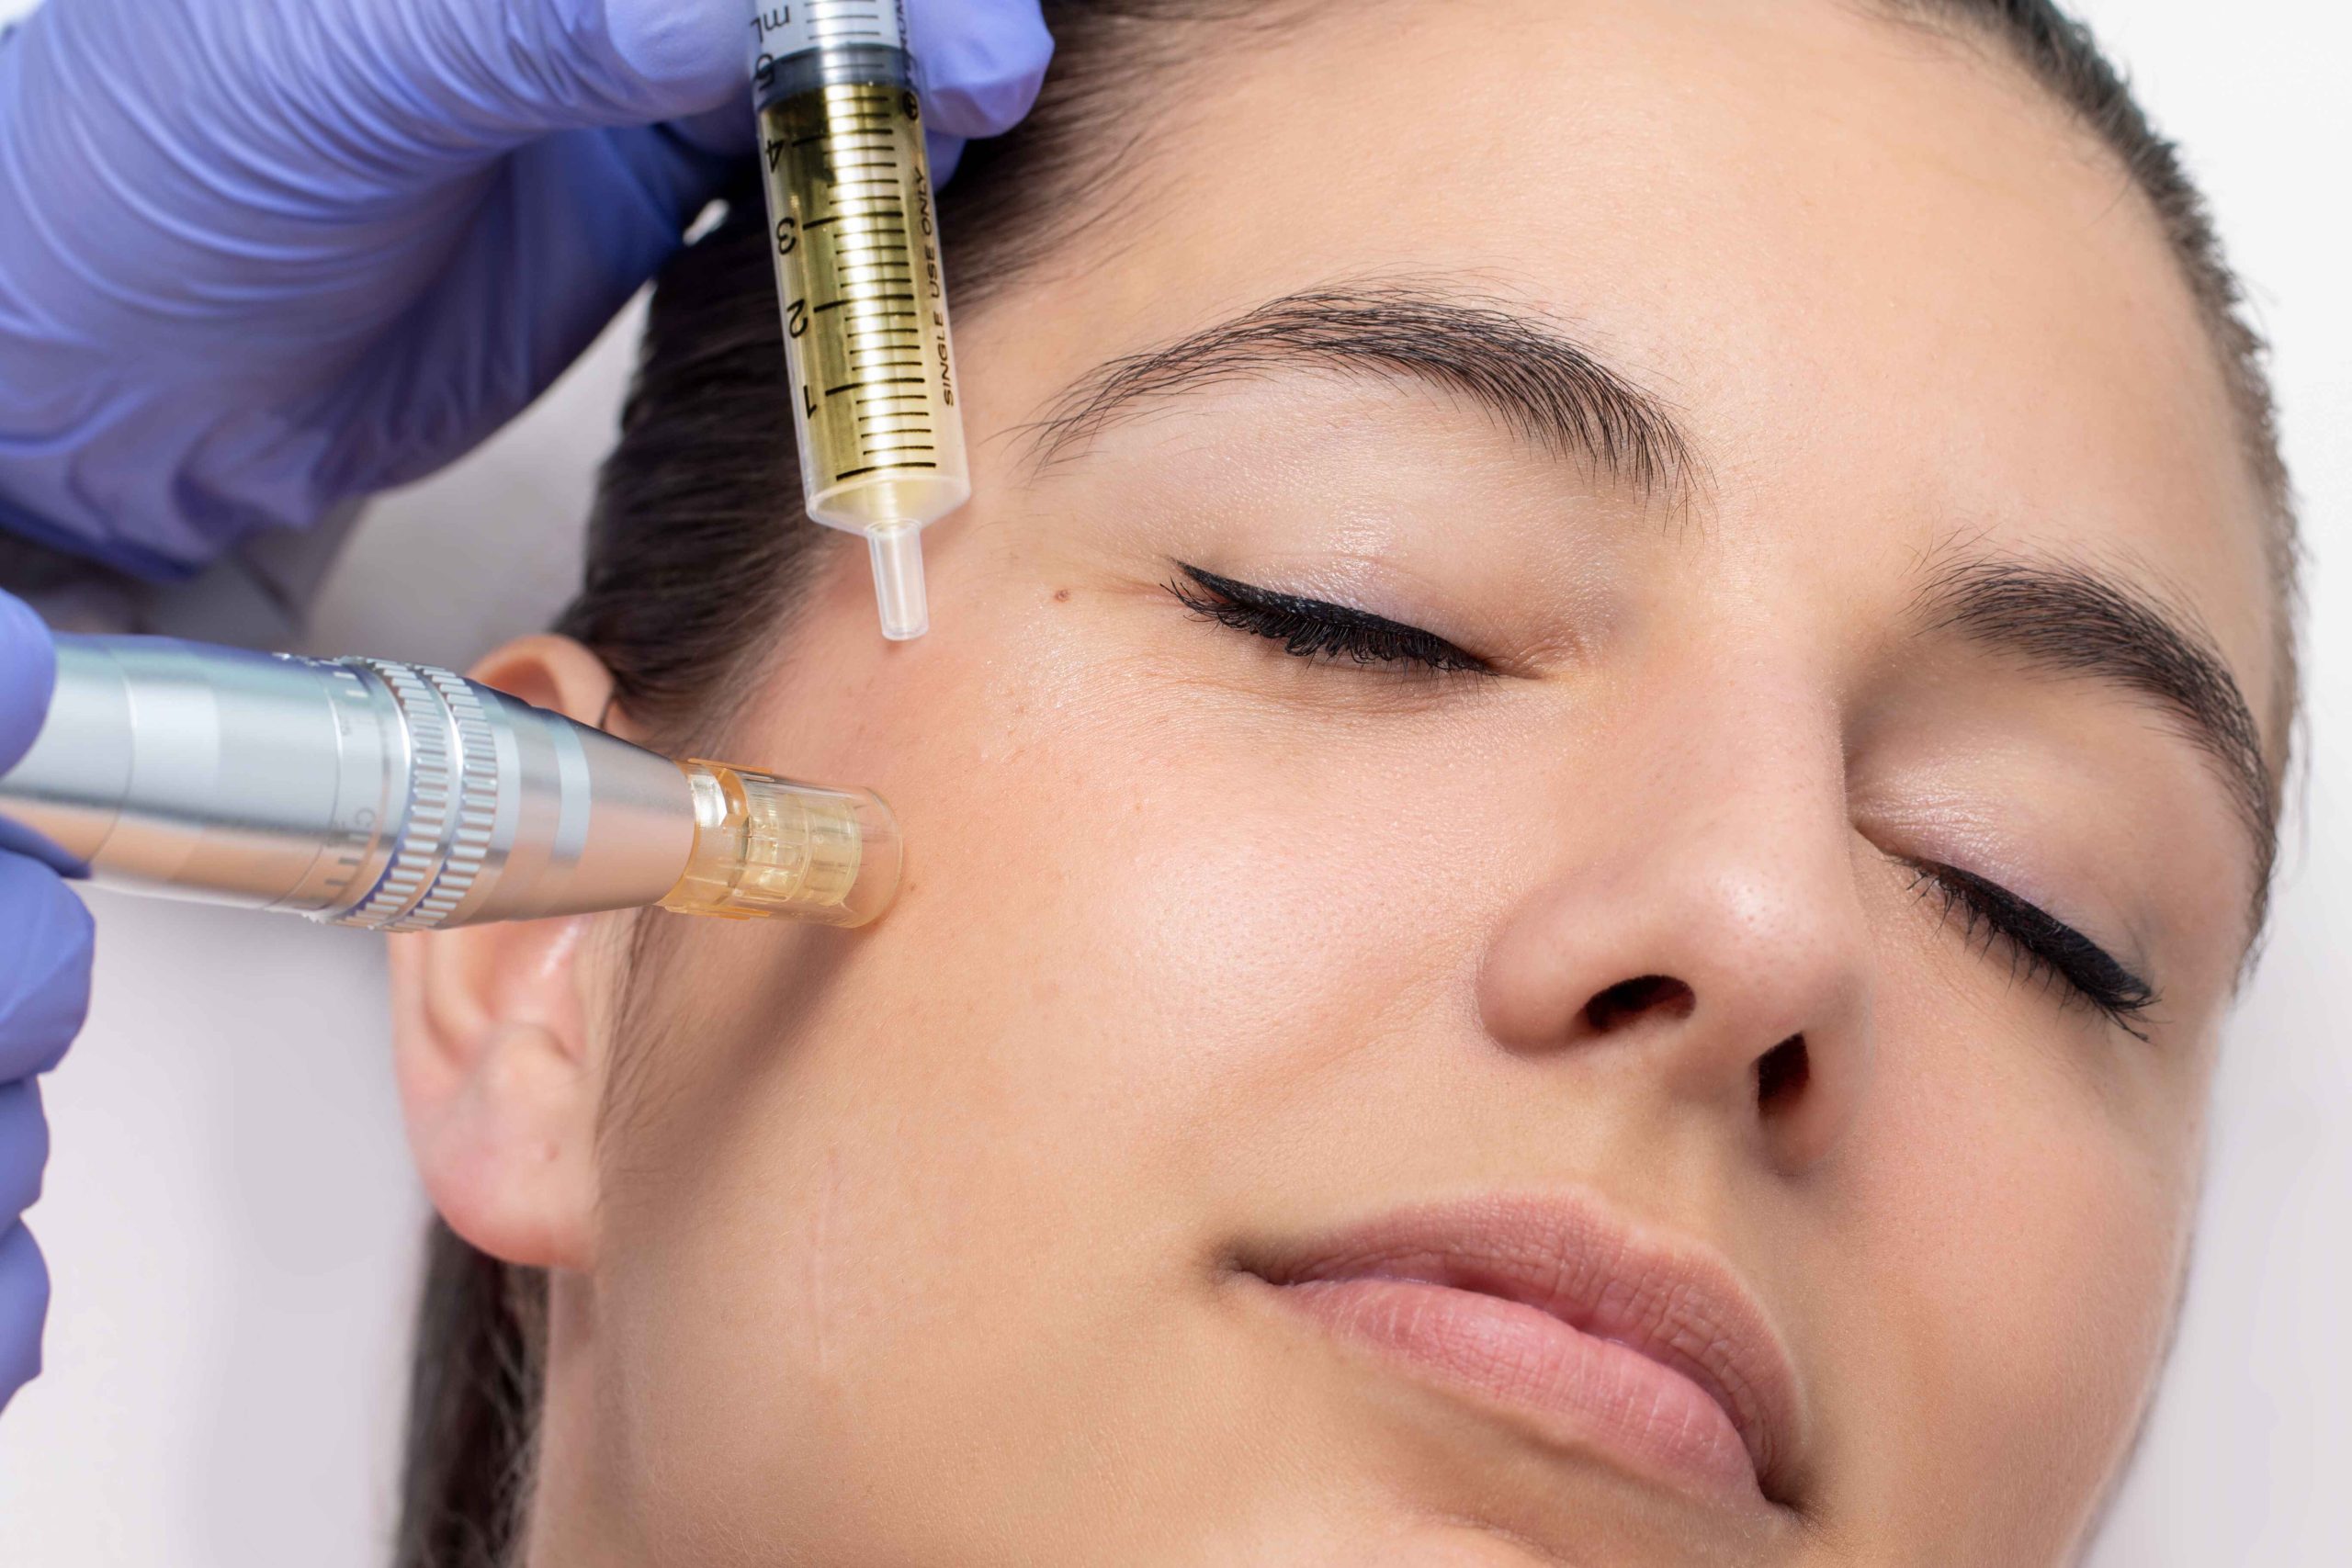 Get Smooth, Wrinkle-Free Skin with Effective Chemical Peel Treatment near Southlake, TX, and Surrounding DFW Area